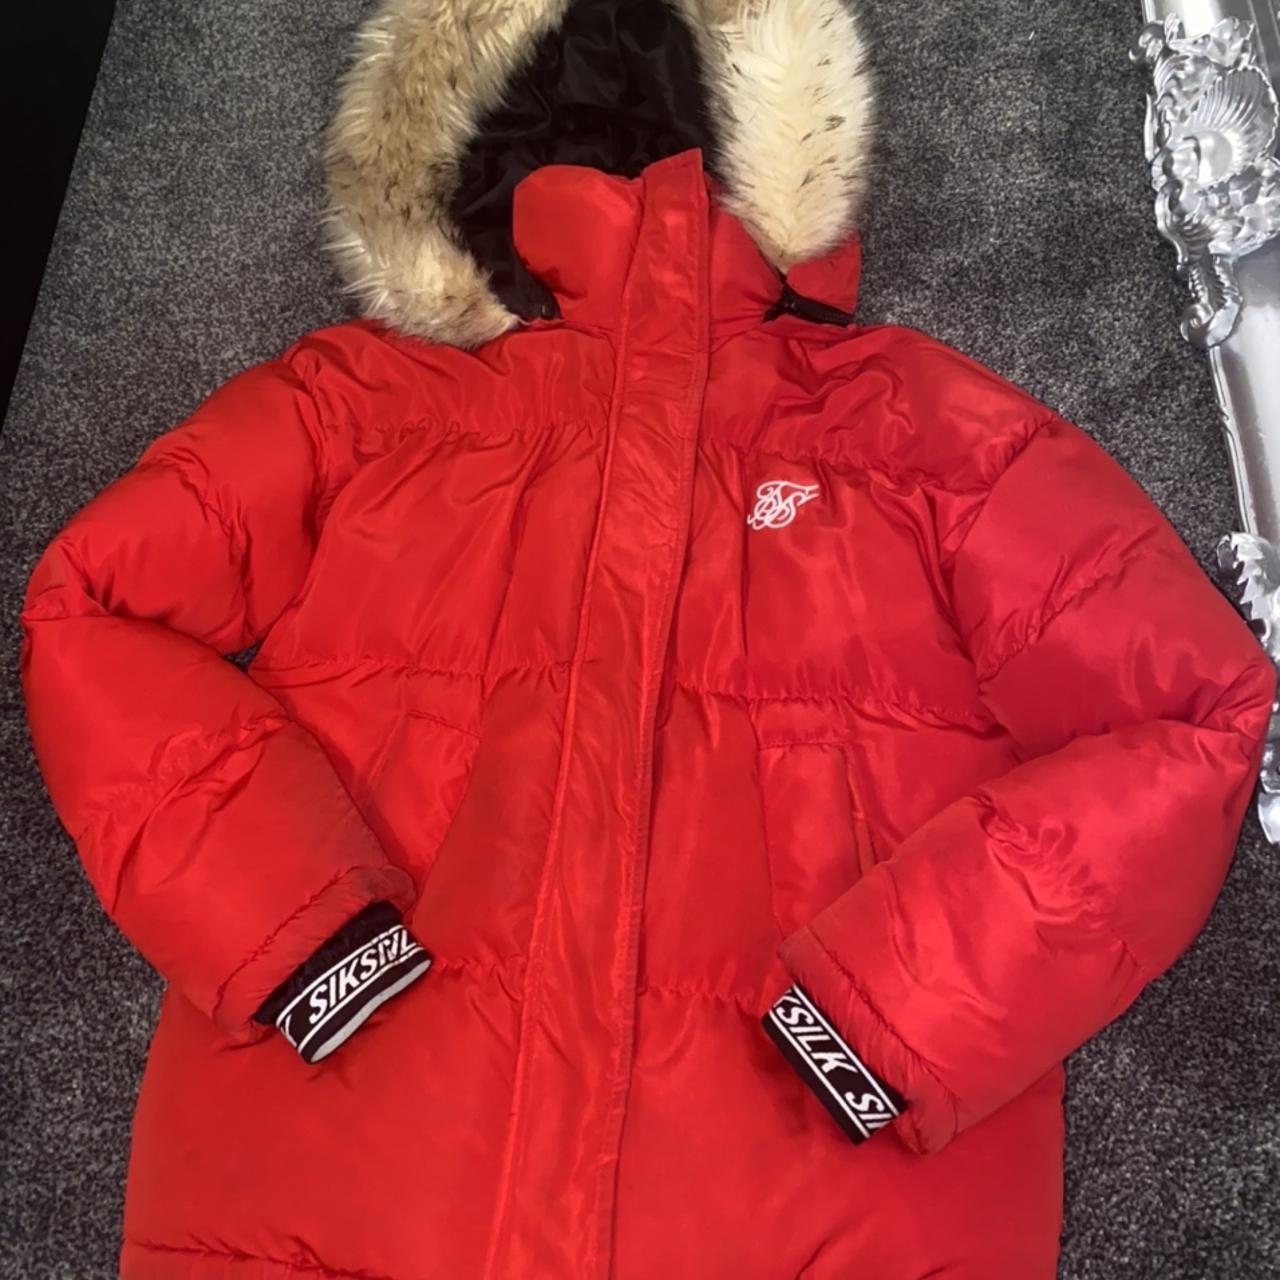 River Island Red faux fur trim hooded puffer coat  Red faux fur, What to  wear today, Mens outdoor jackets